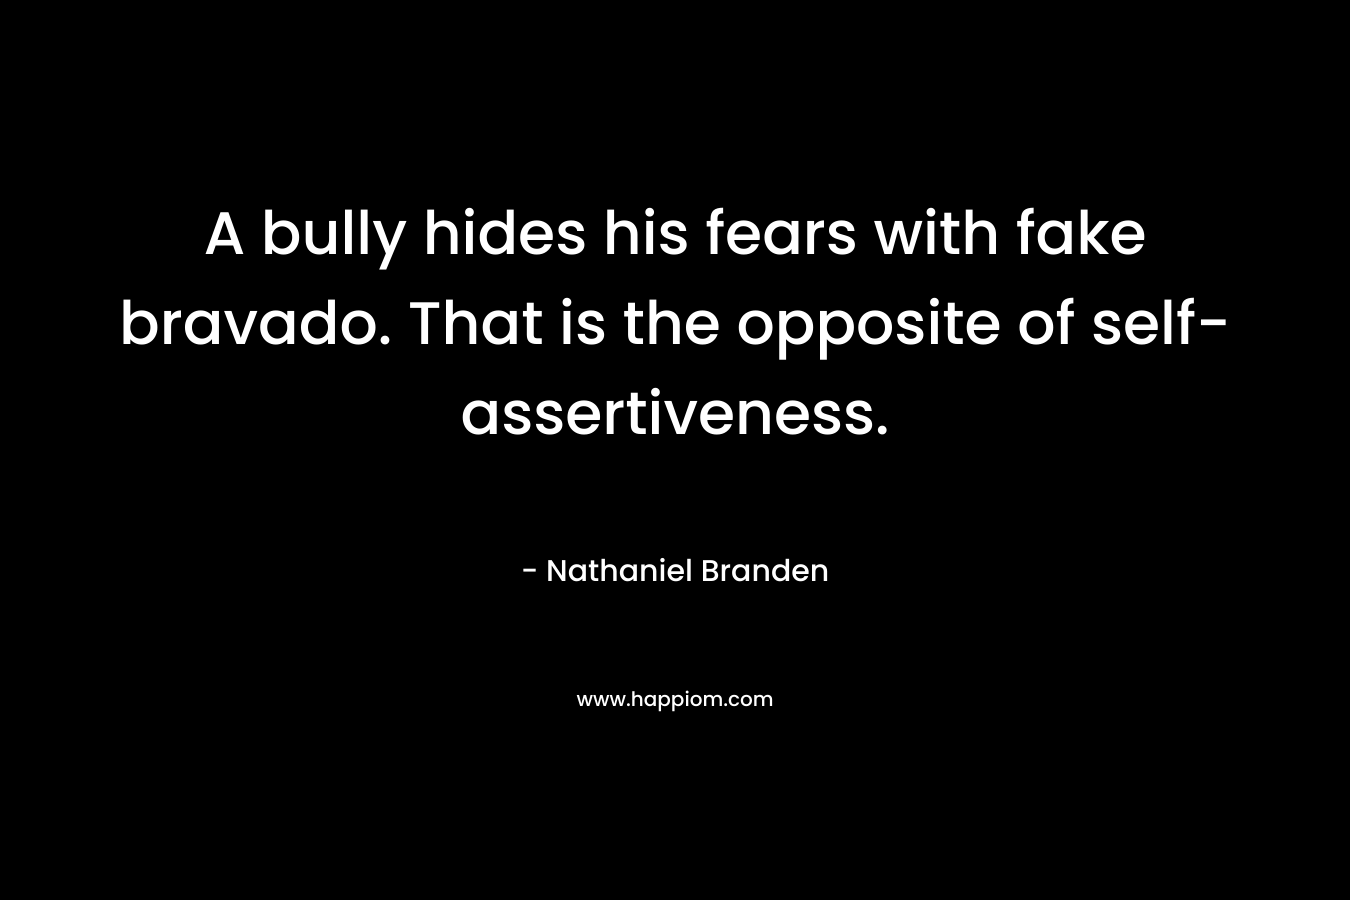 A bully hides his fears with fake bravado. That is the opposite of self-assertiveness. – Nathaniel Branden